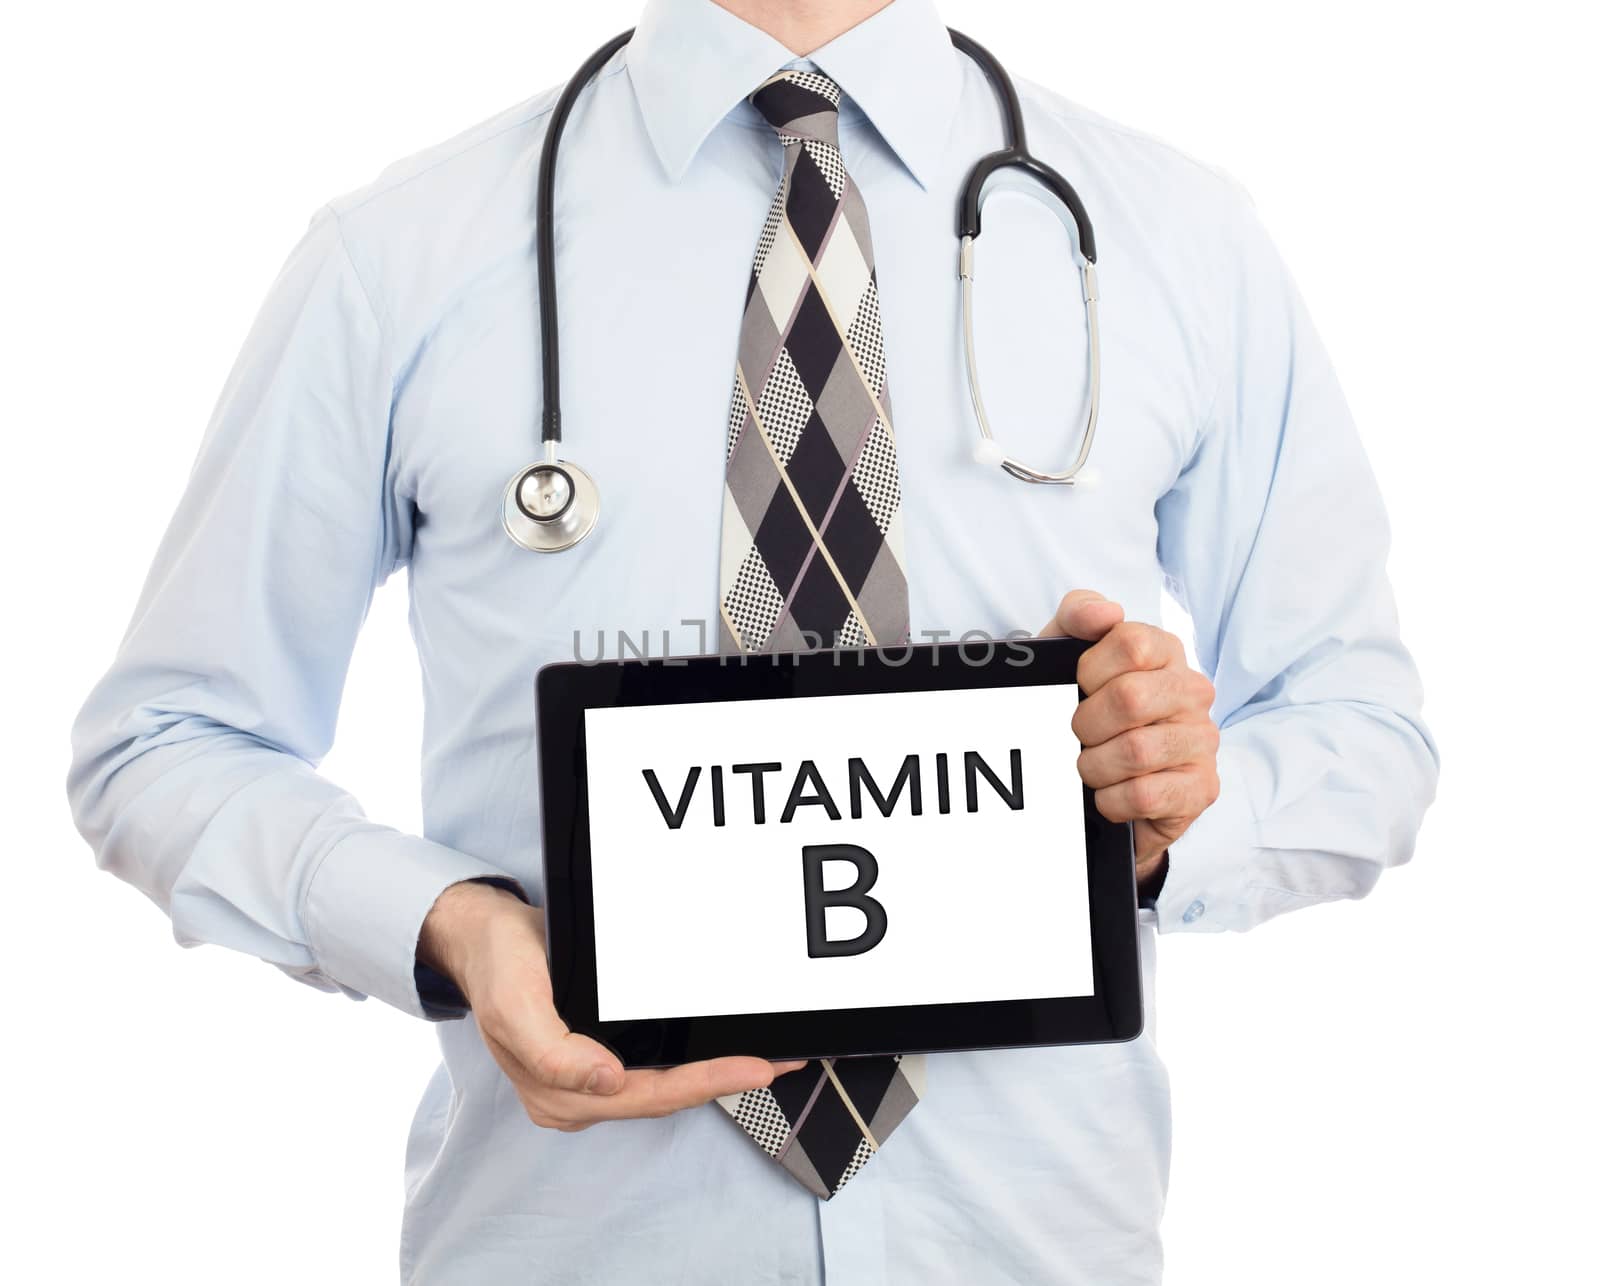 Doctor holding tablet - Vitamin B by michaklootwijk